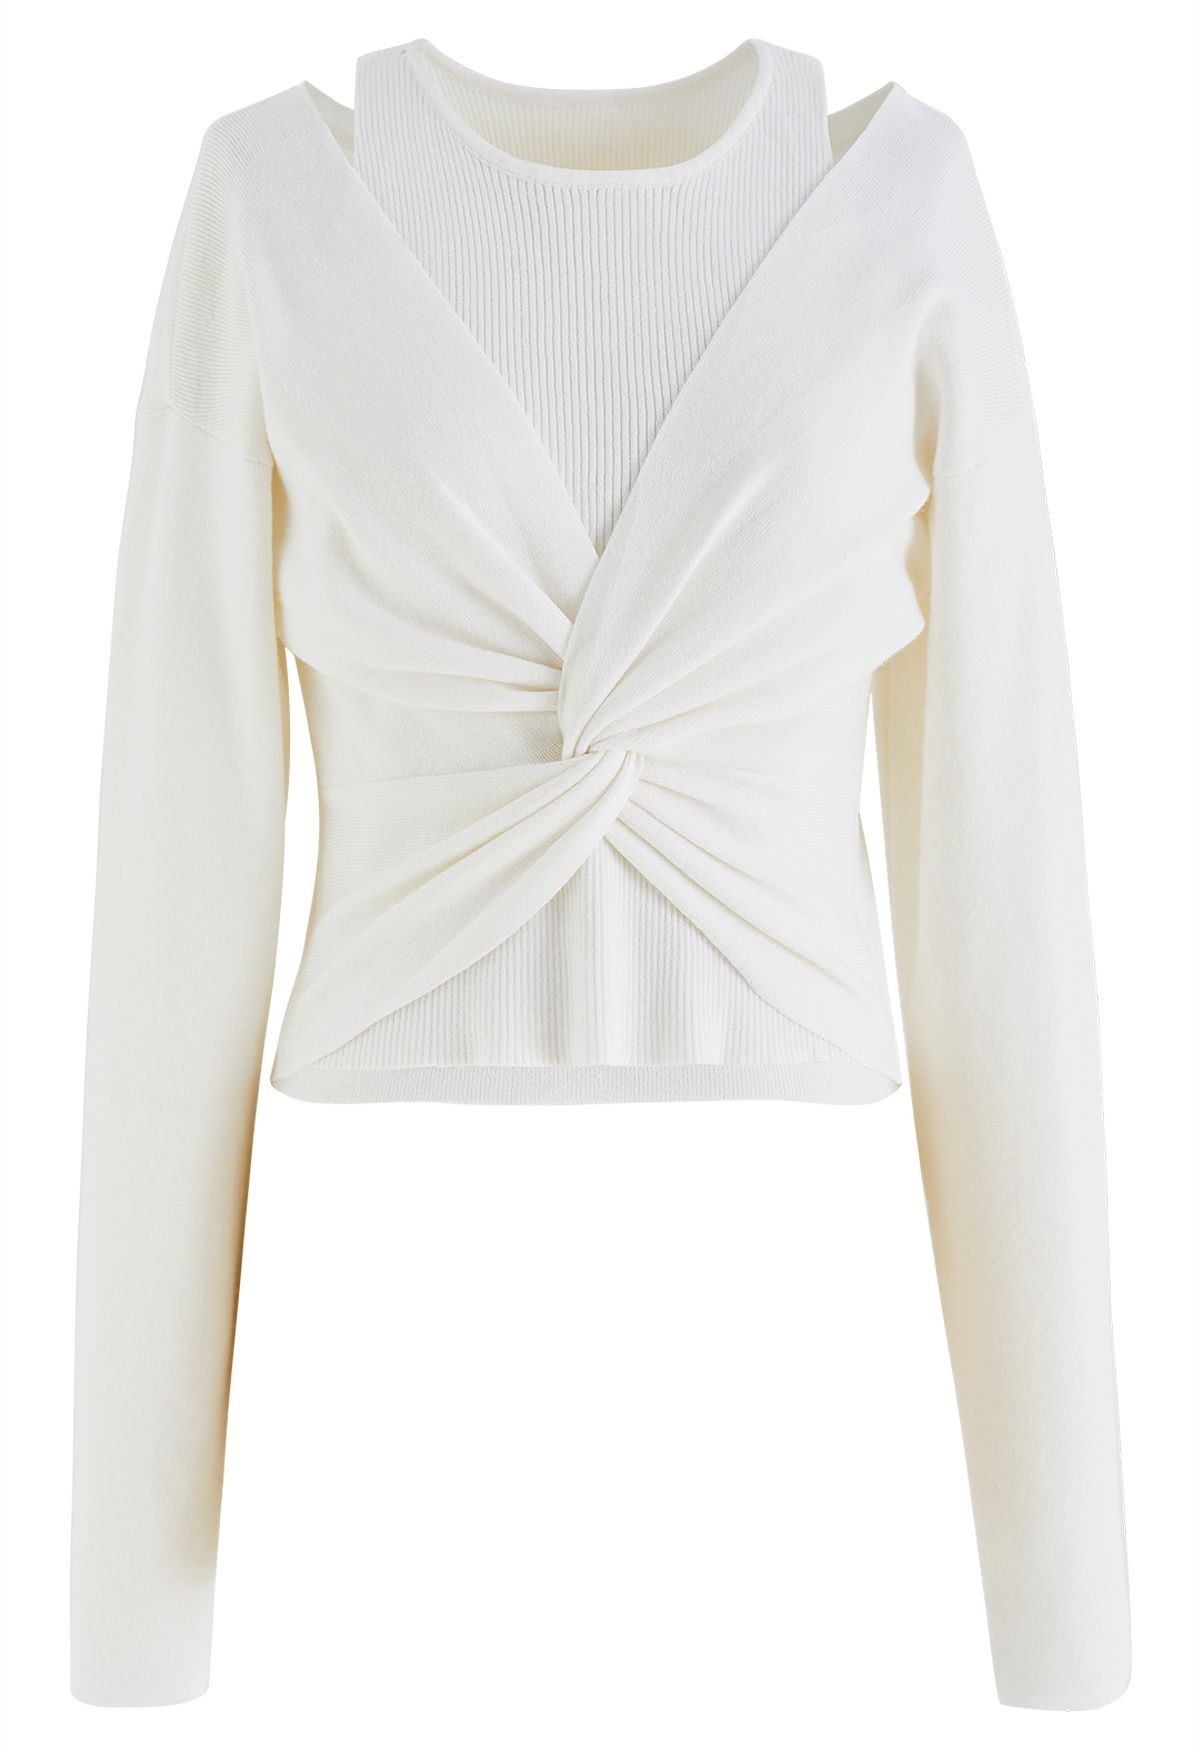 Twist Front Faux Two-Piece Knit Top in White - Retro, Indie and Unique ...